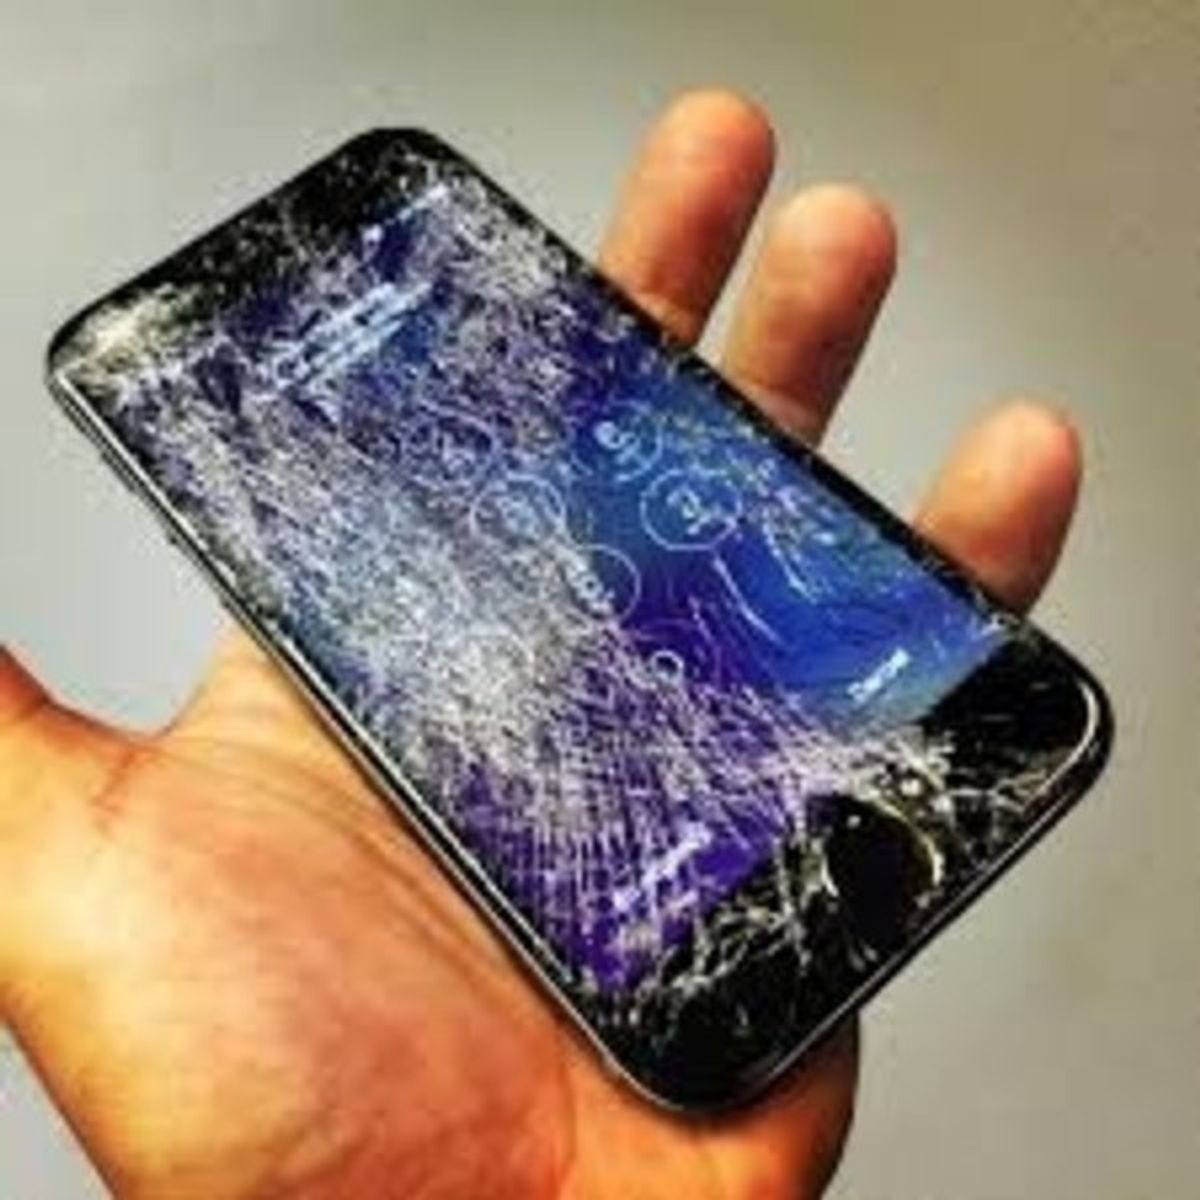 The 5 Emotional Stages of Breaking Your Phone